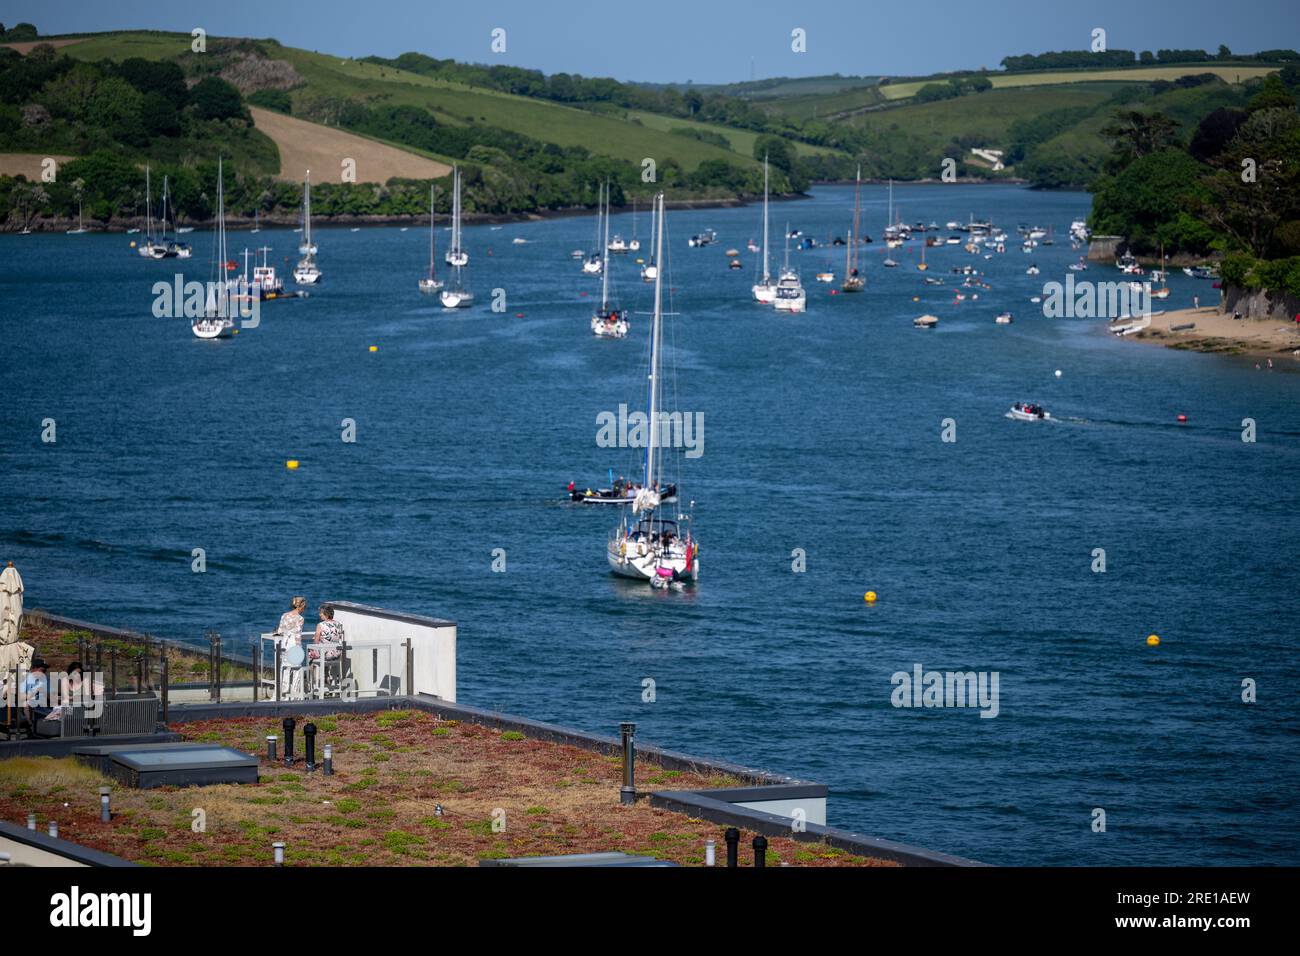 View along Salcombe estuary with yachts at anchor and the Harbour Hotel in the foreground on a bright summers day with calm water Stock Photo